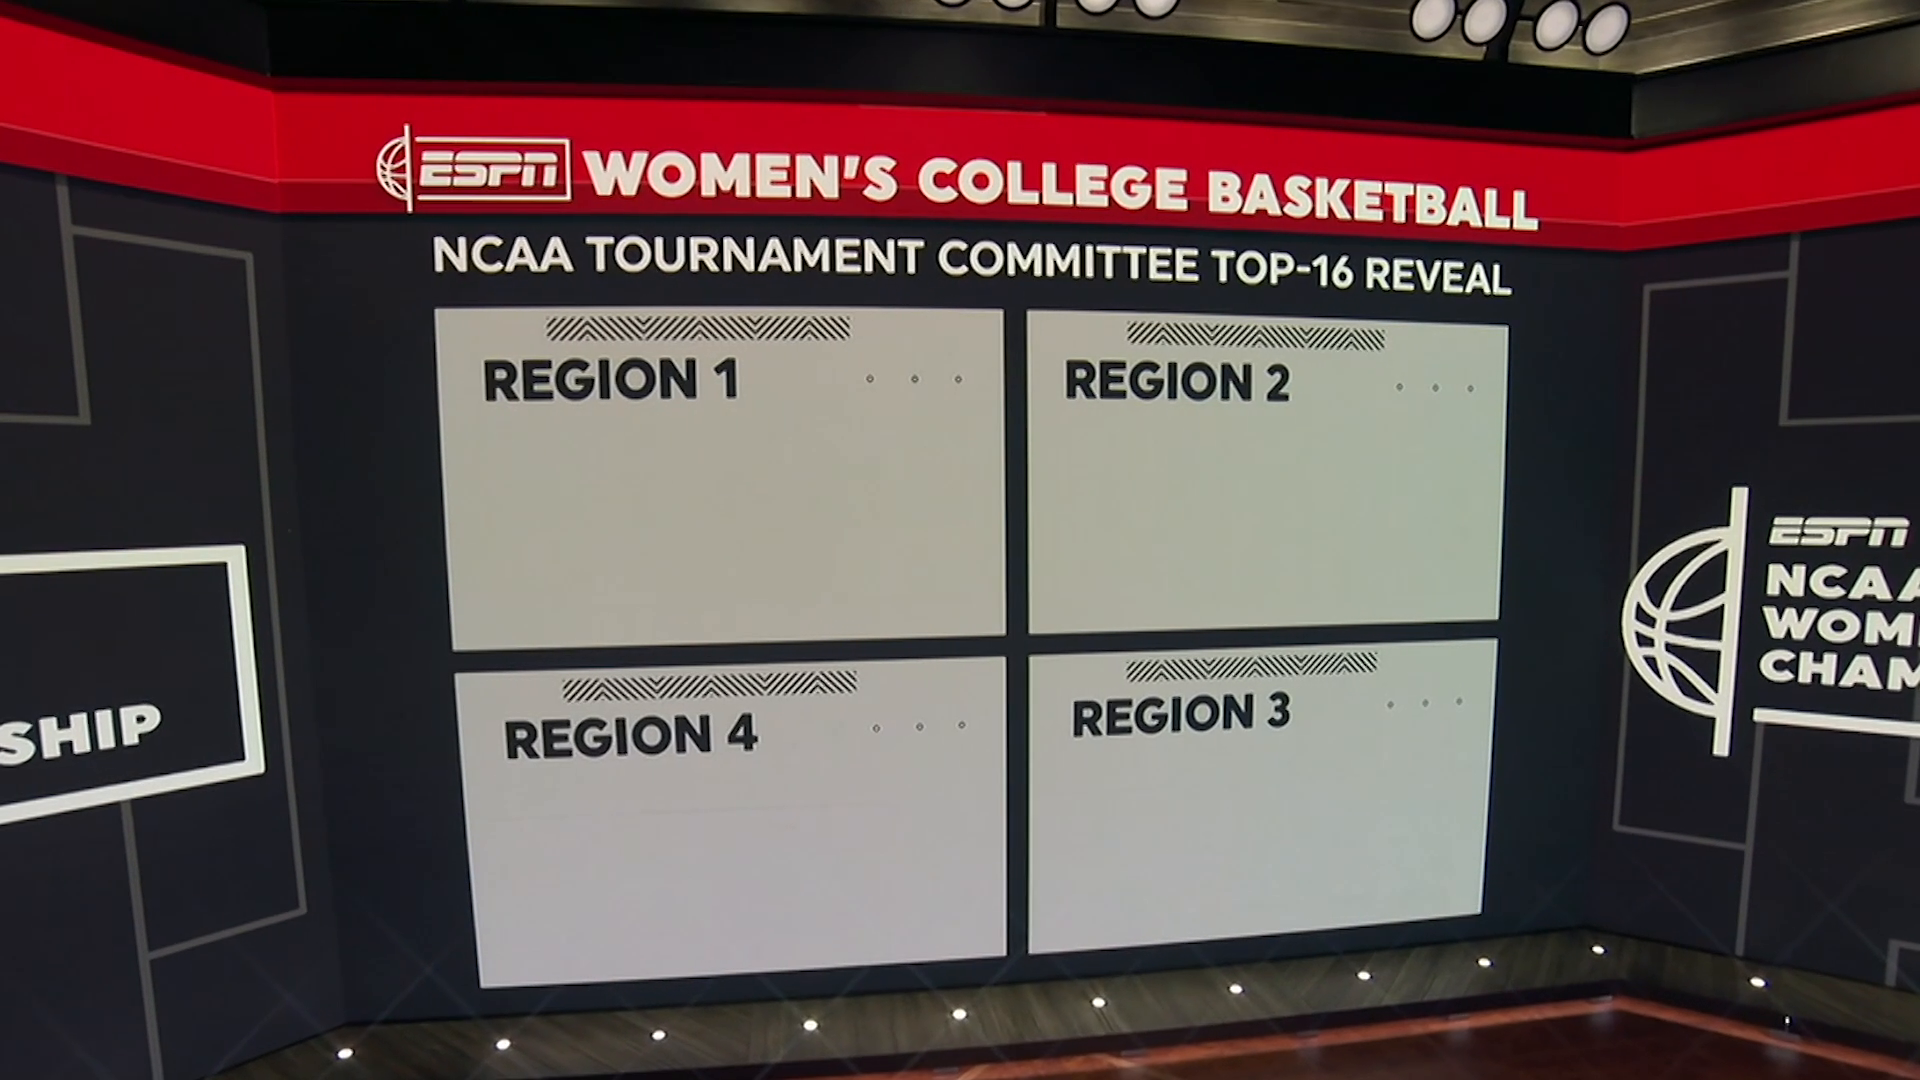 The top 16 seeds right now, revealed by the NCAA women's selection